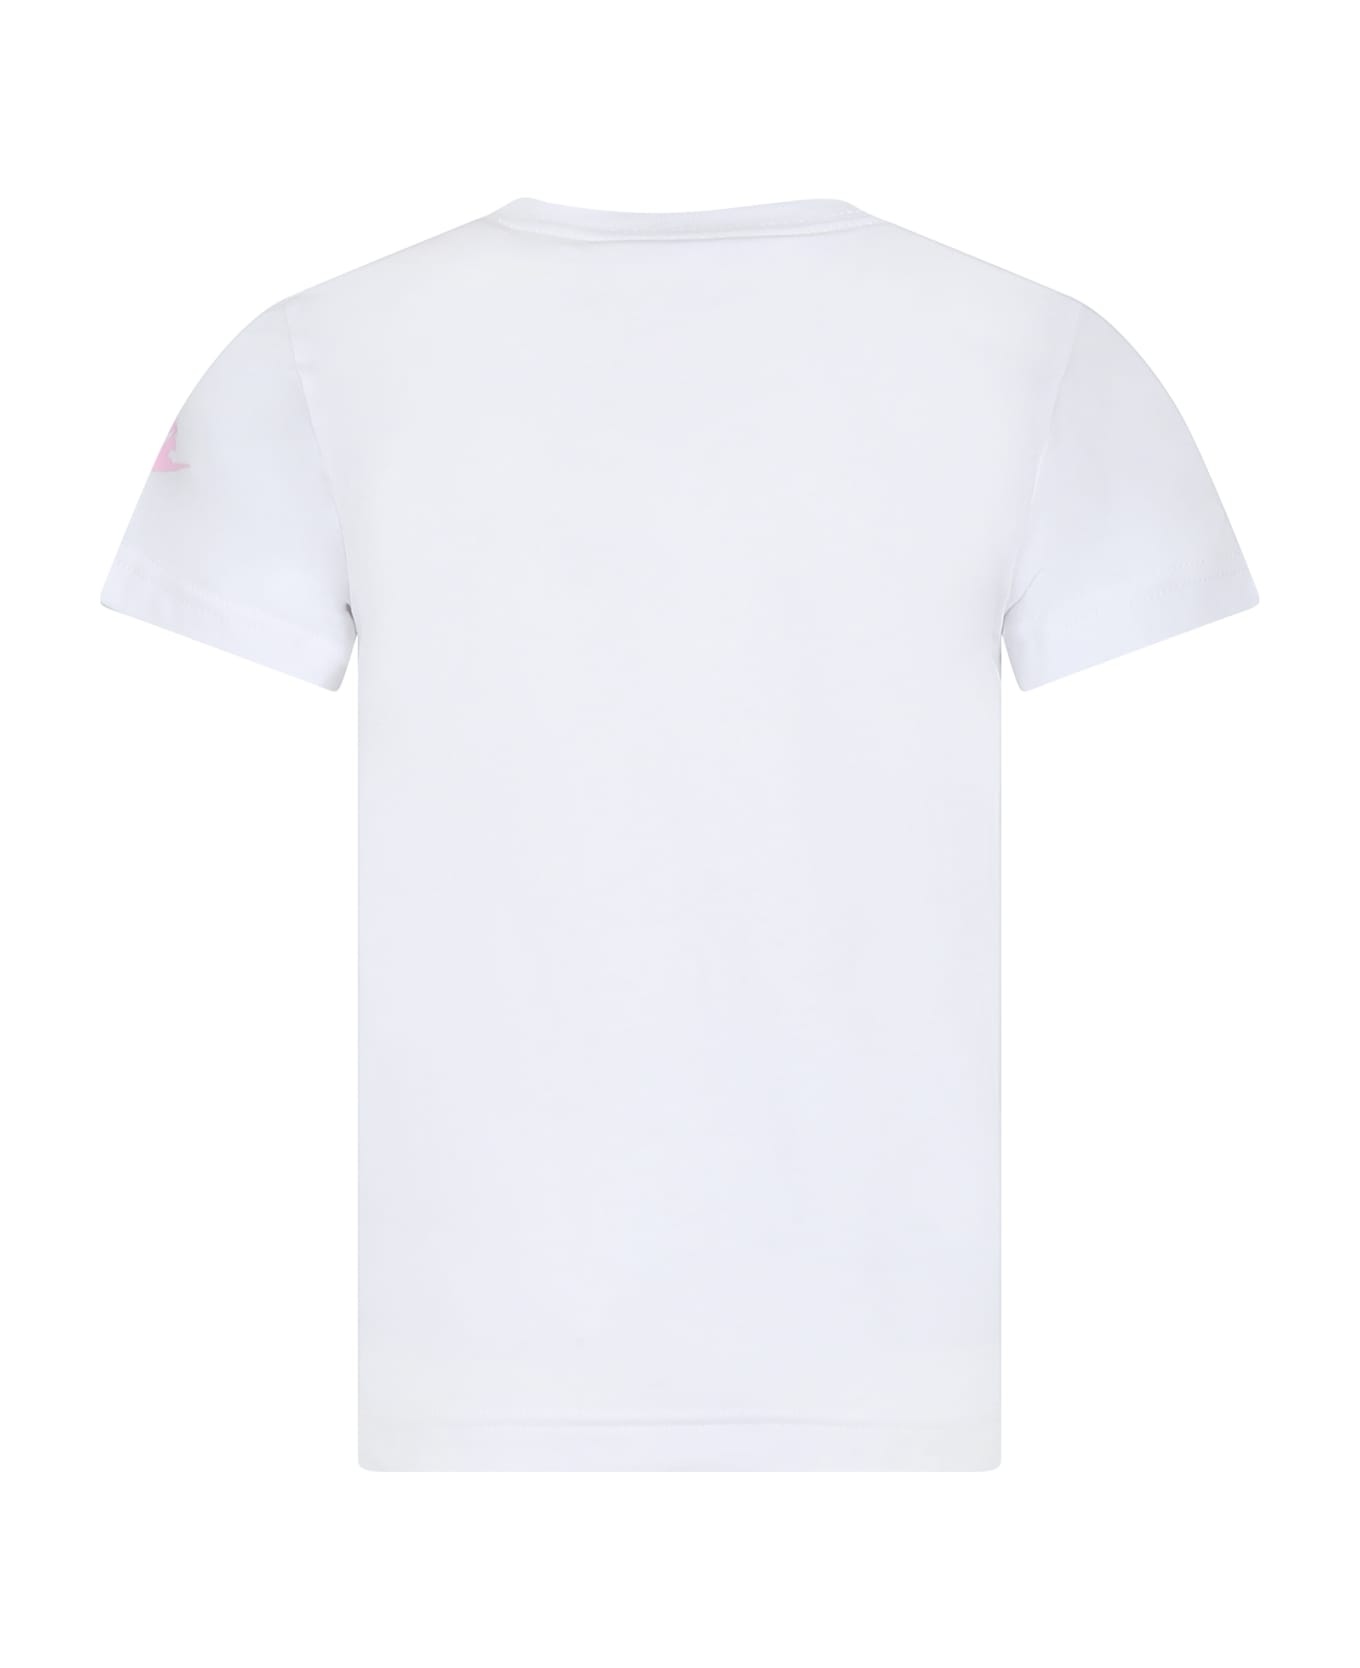 Nike White T-shirt For Boy With Logo And Swoosh - White